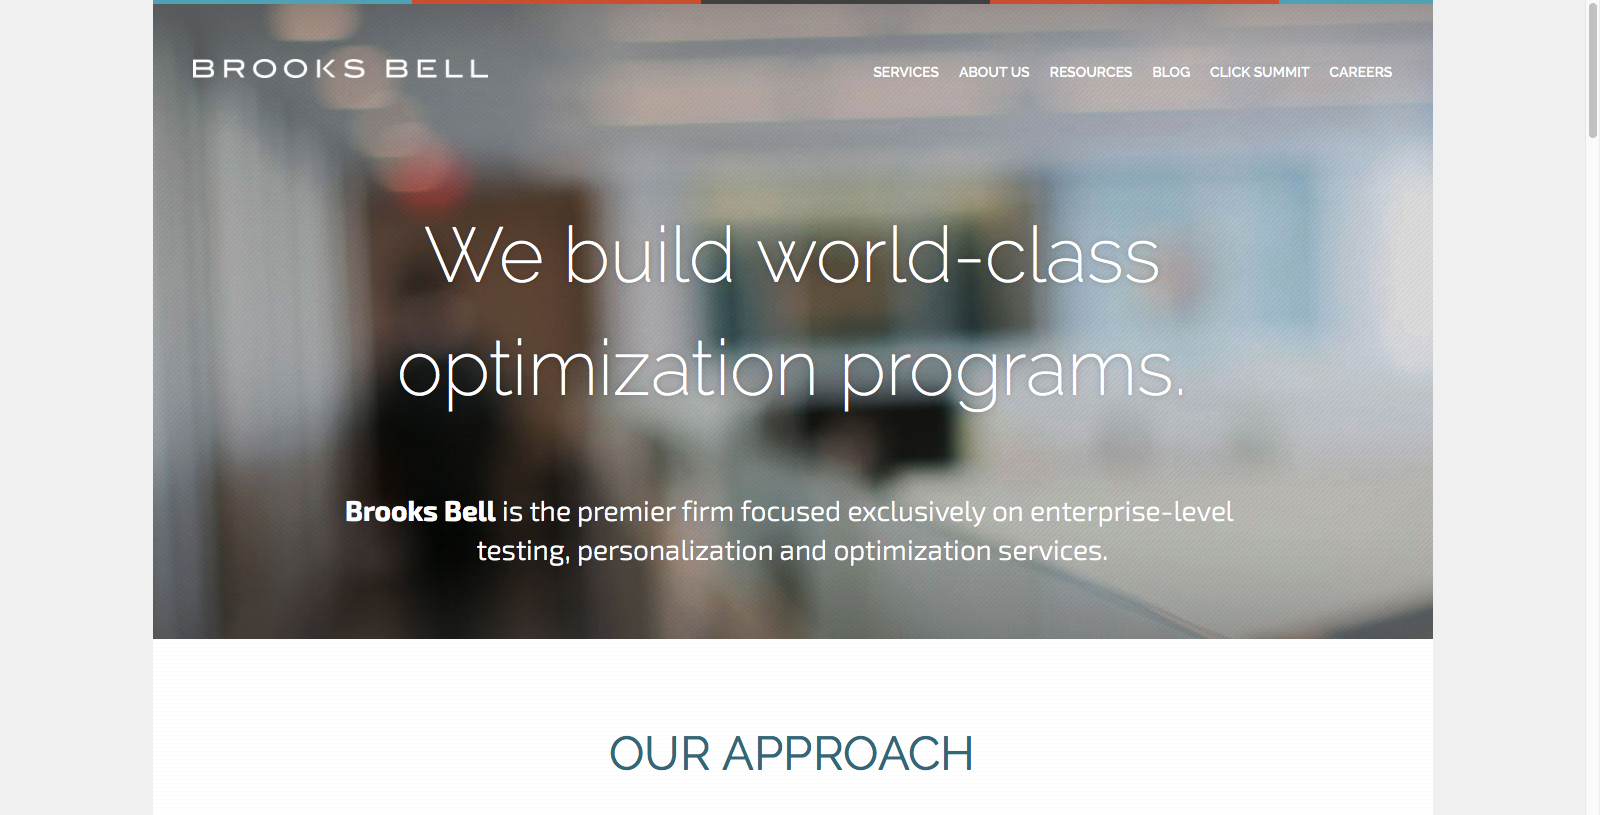 Brooks Bell homepage 1600 x 900 resolution